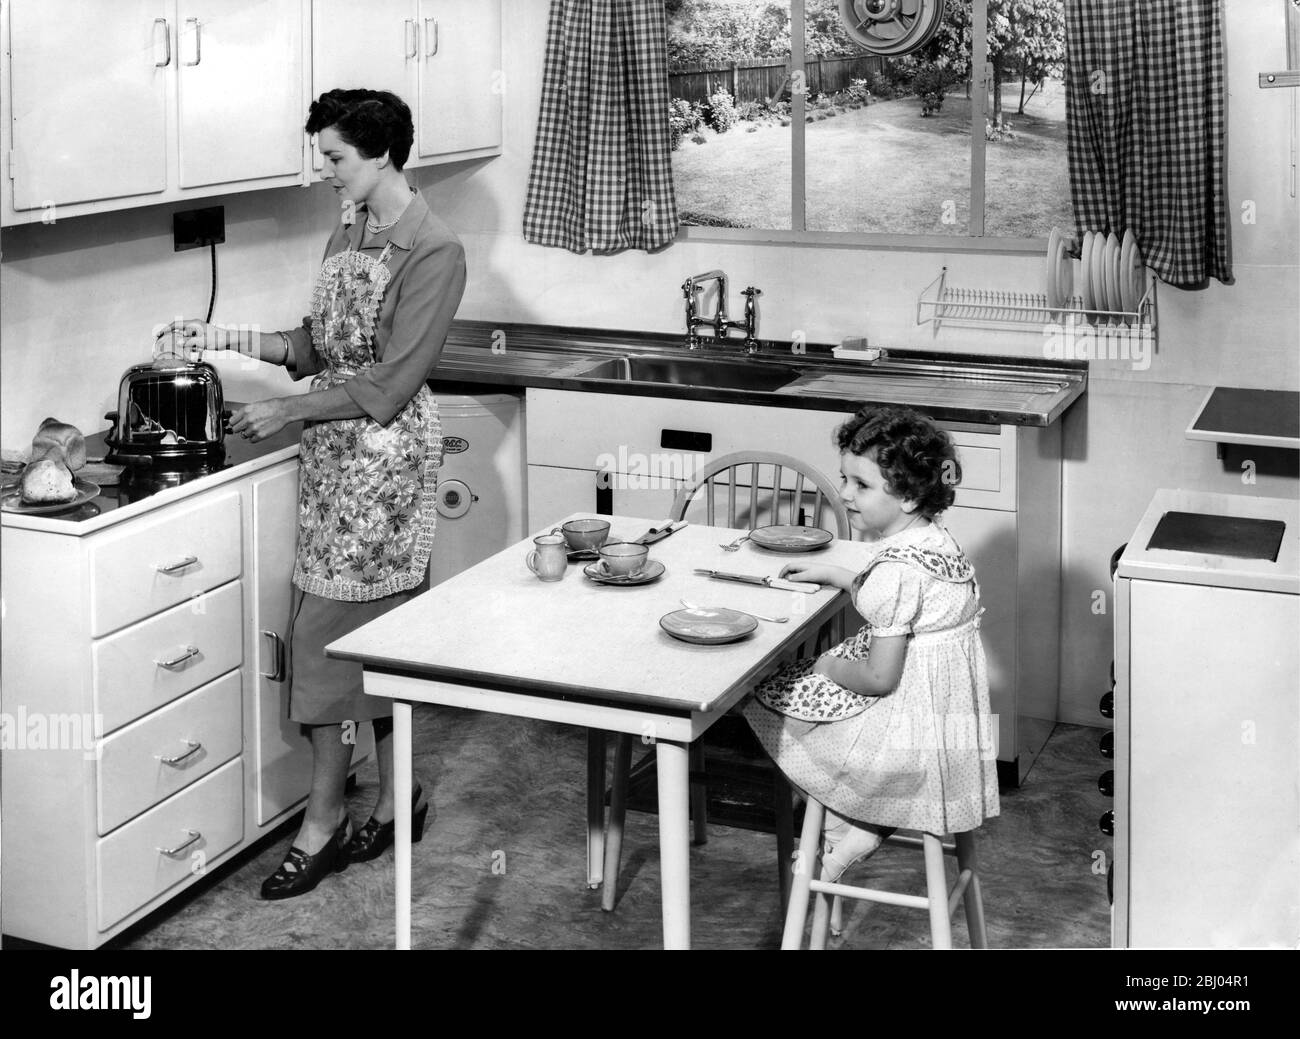 A idyllic view of a 1950s kitchen. The Mother puts some toast on while her daughter waits for breakfast. Stock Photo